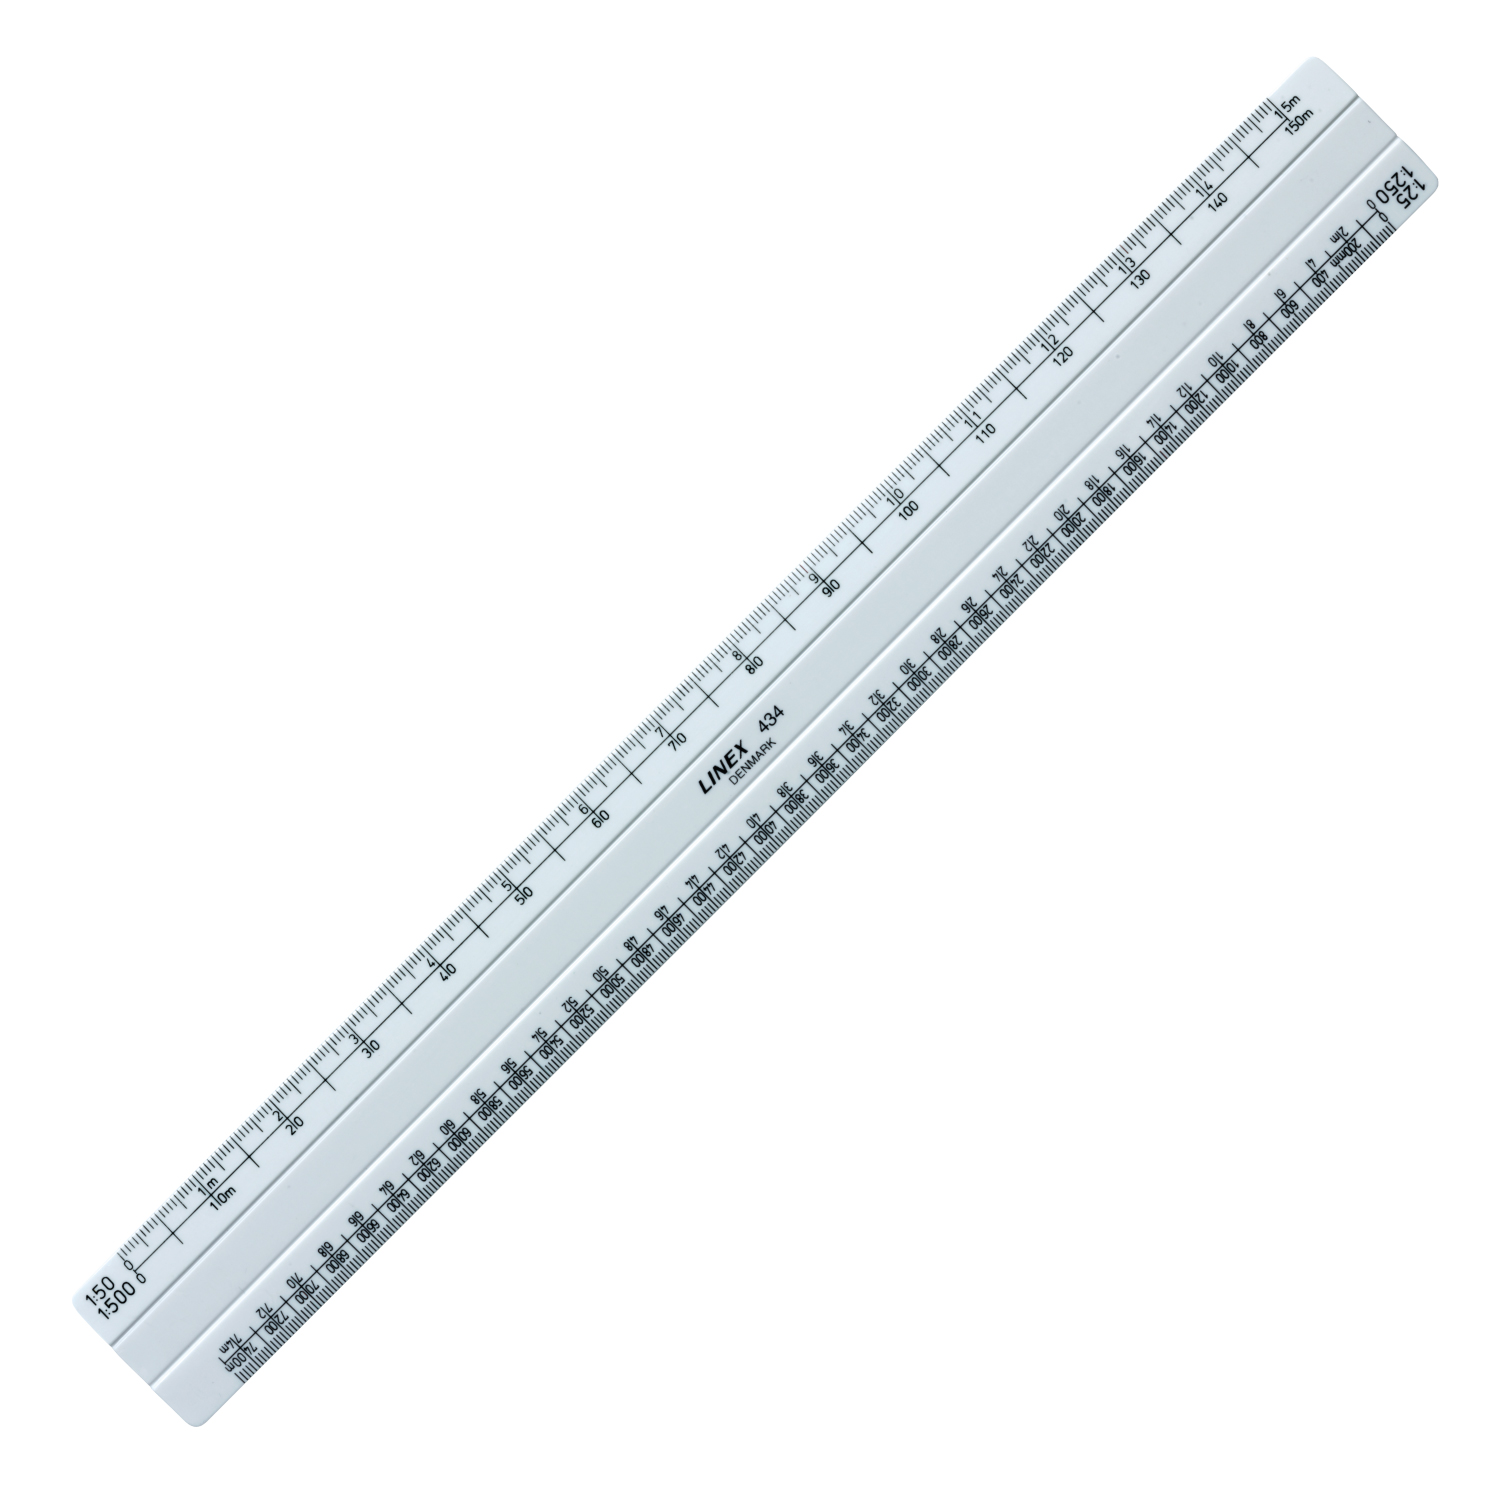 300mm Linex architects flat oval scale ruler - six ...